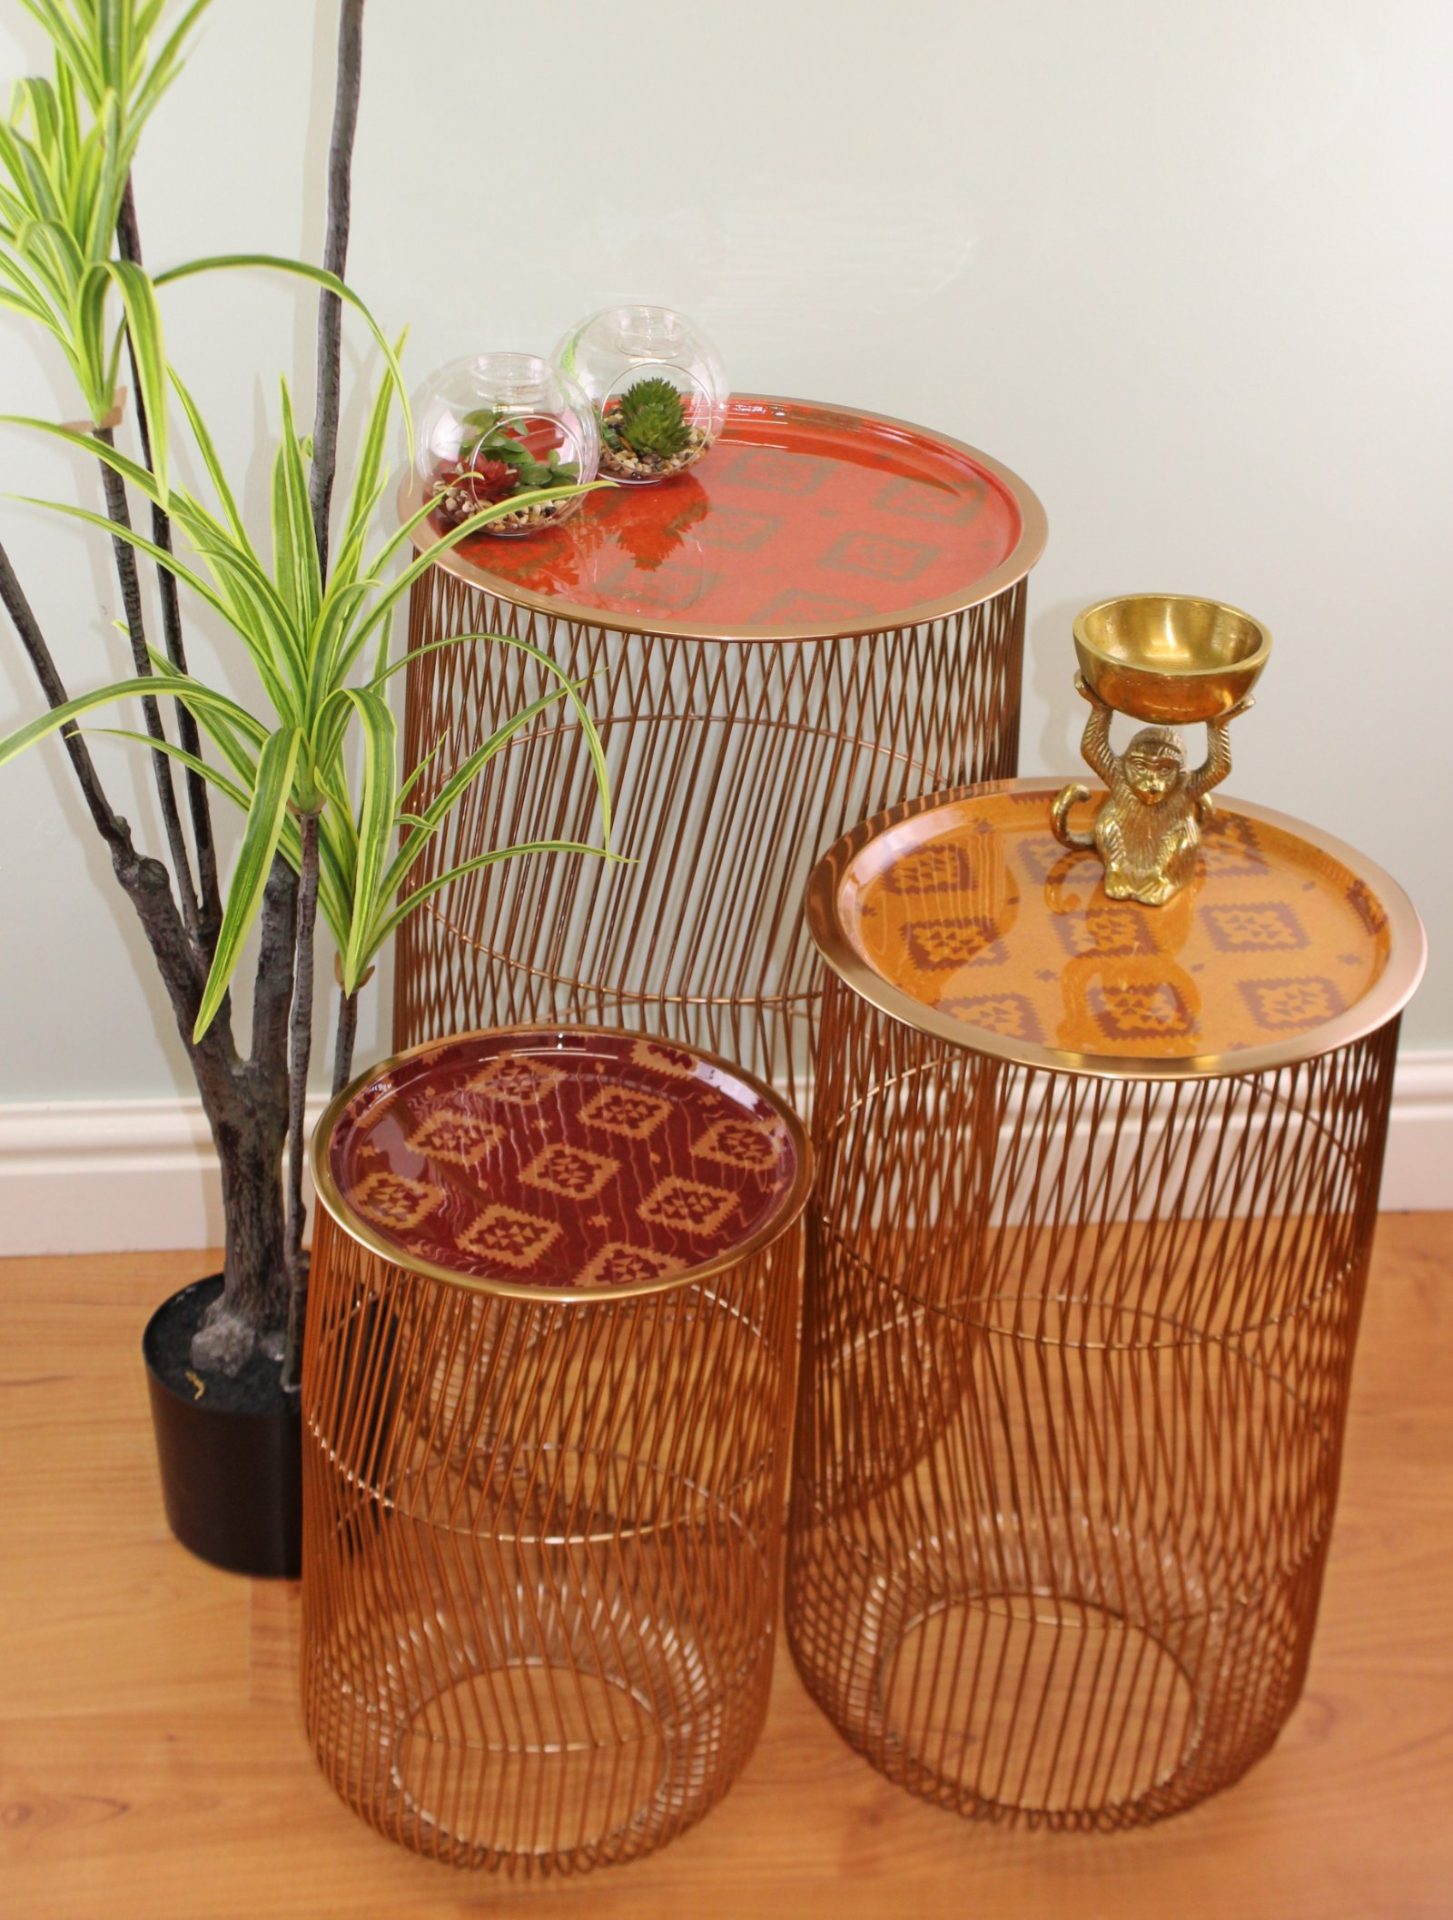 Zwina Wire Tables - Set of 3